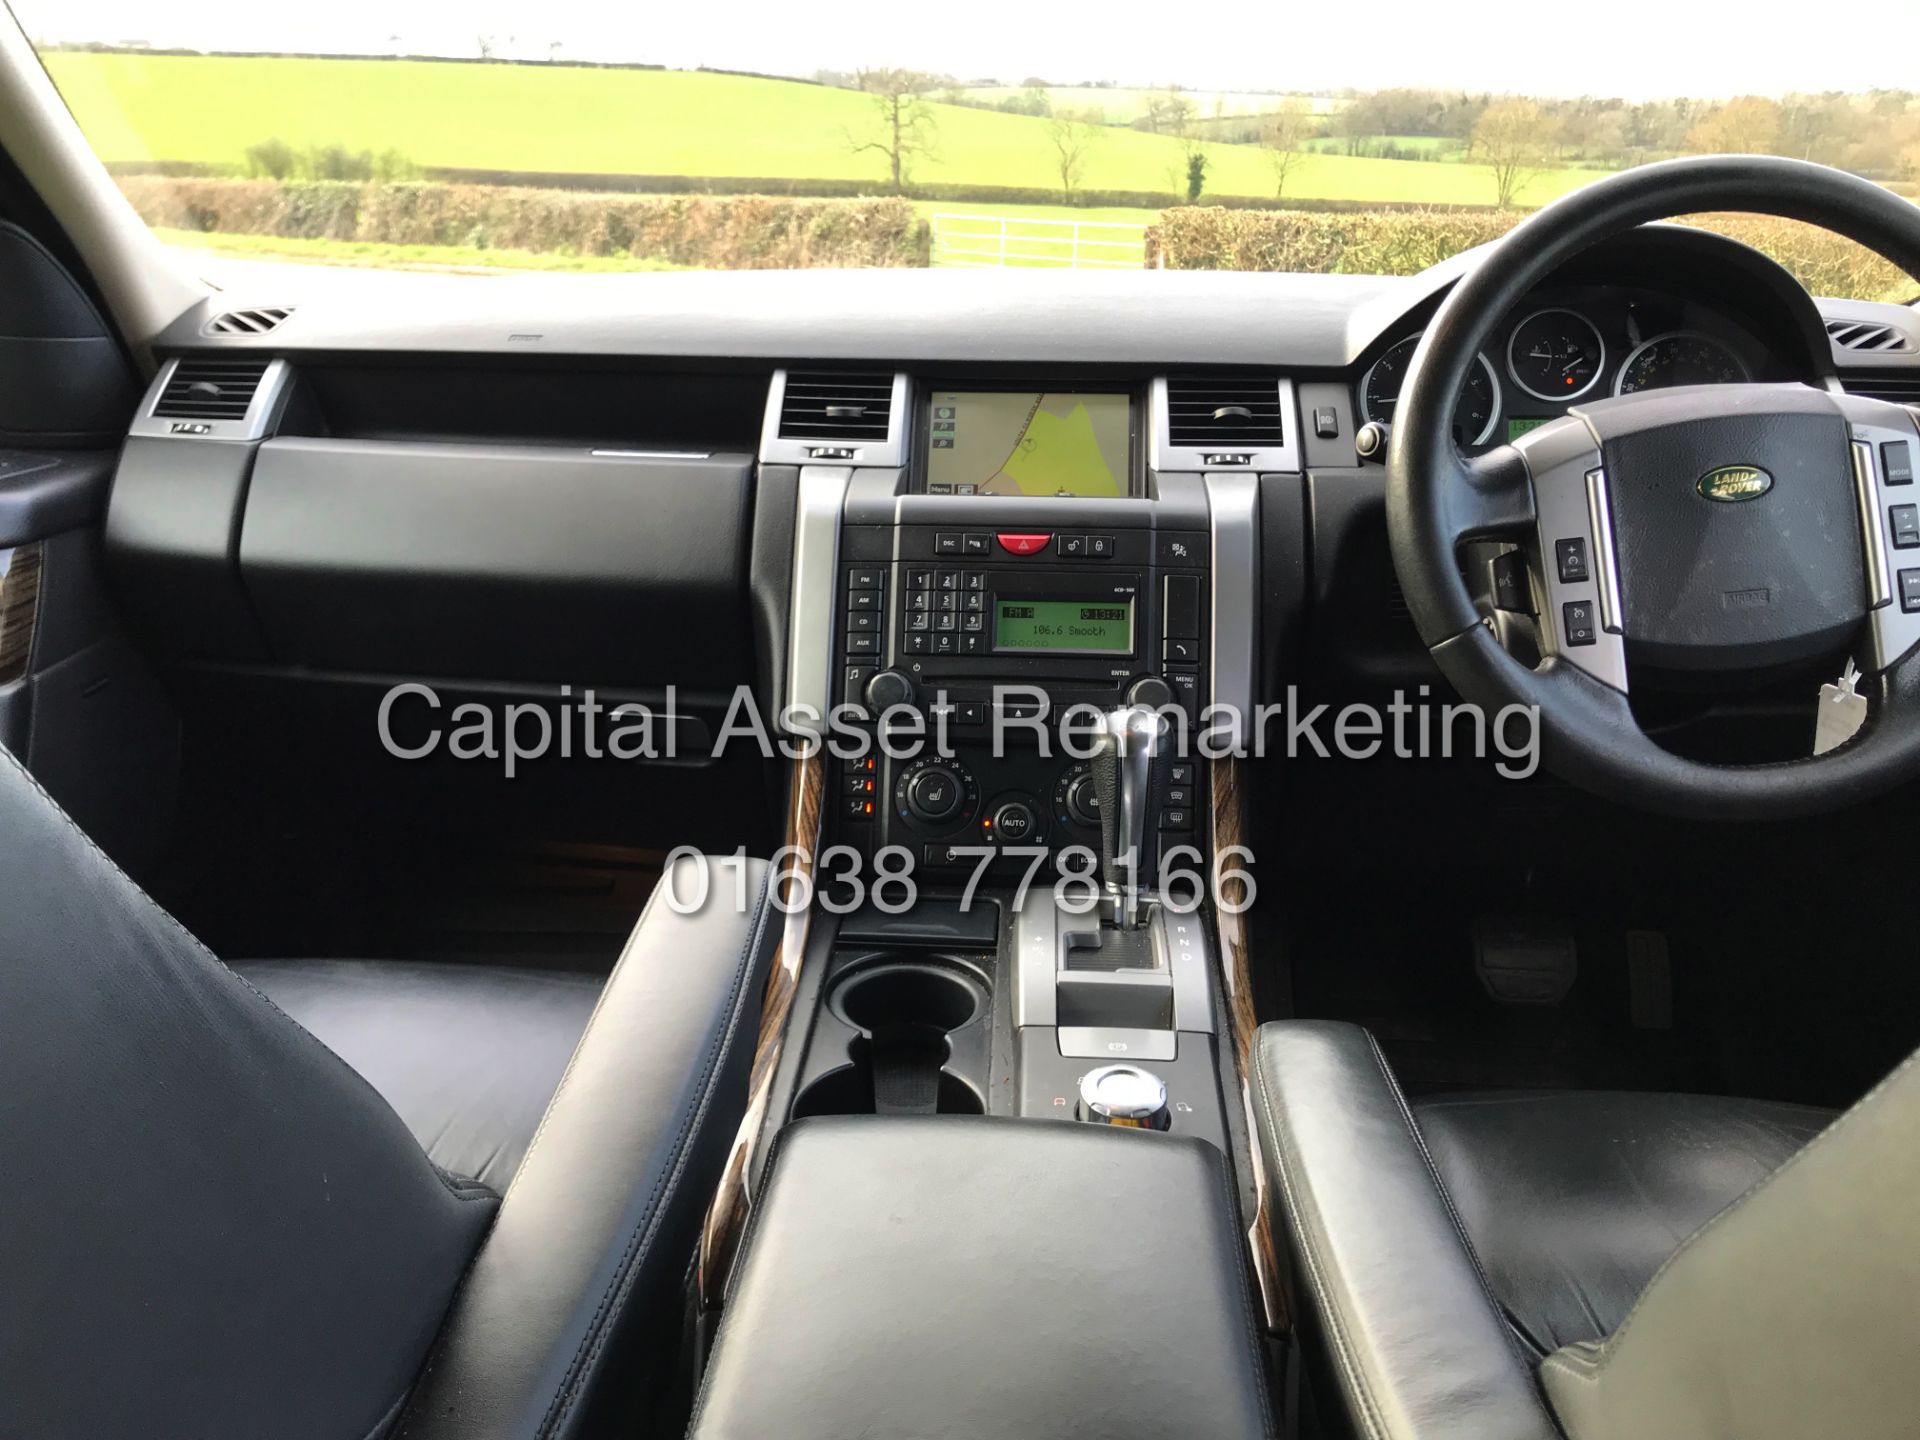 (ON SALE) RANGE ROVER SPORT 2.7TDV6 AUTO (08 REG) FULLY LOADED -SAT NAV -LEATHER-ELECTRIC EVERYTHING - Image 12 of 27